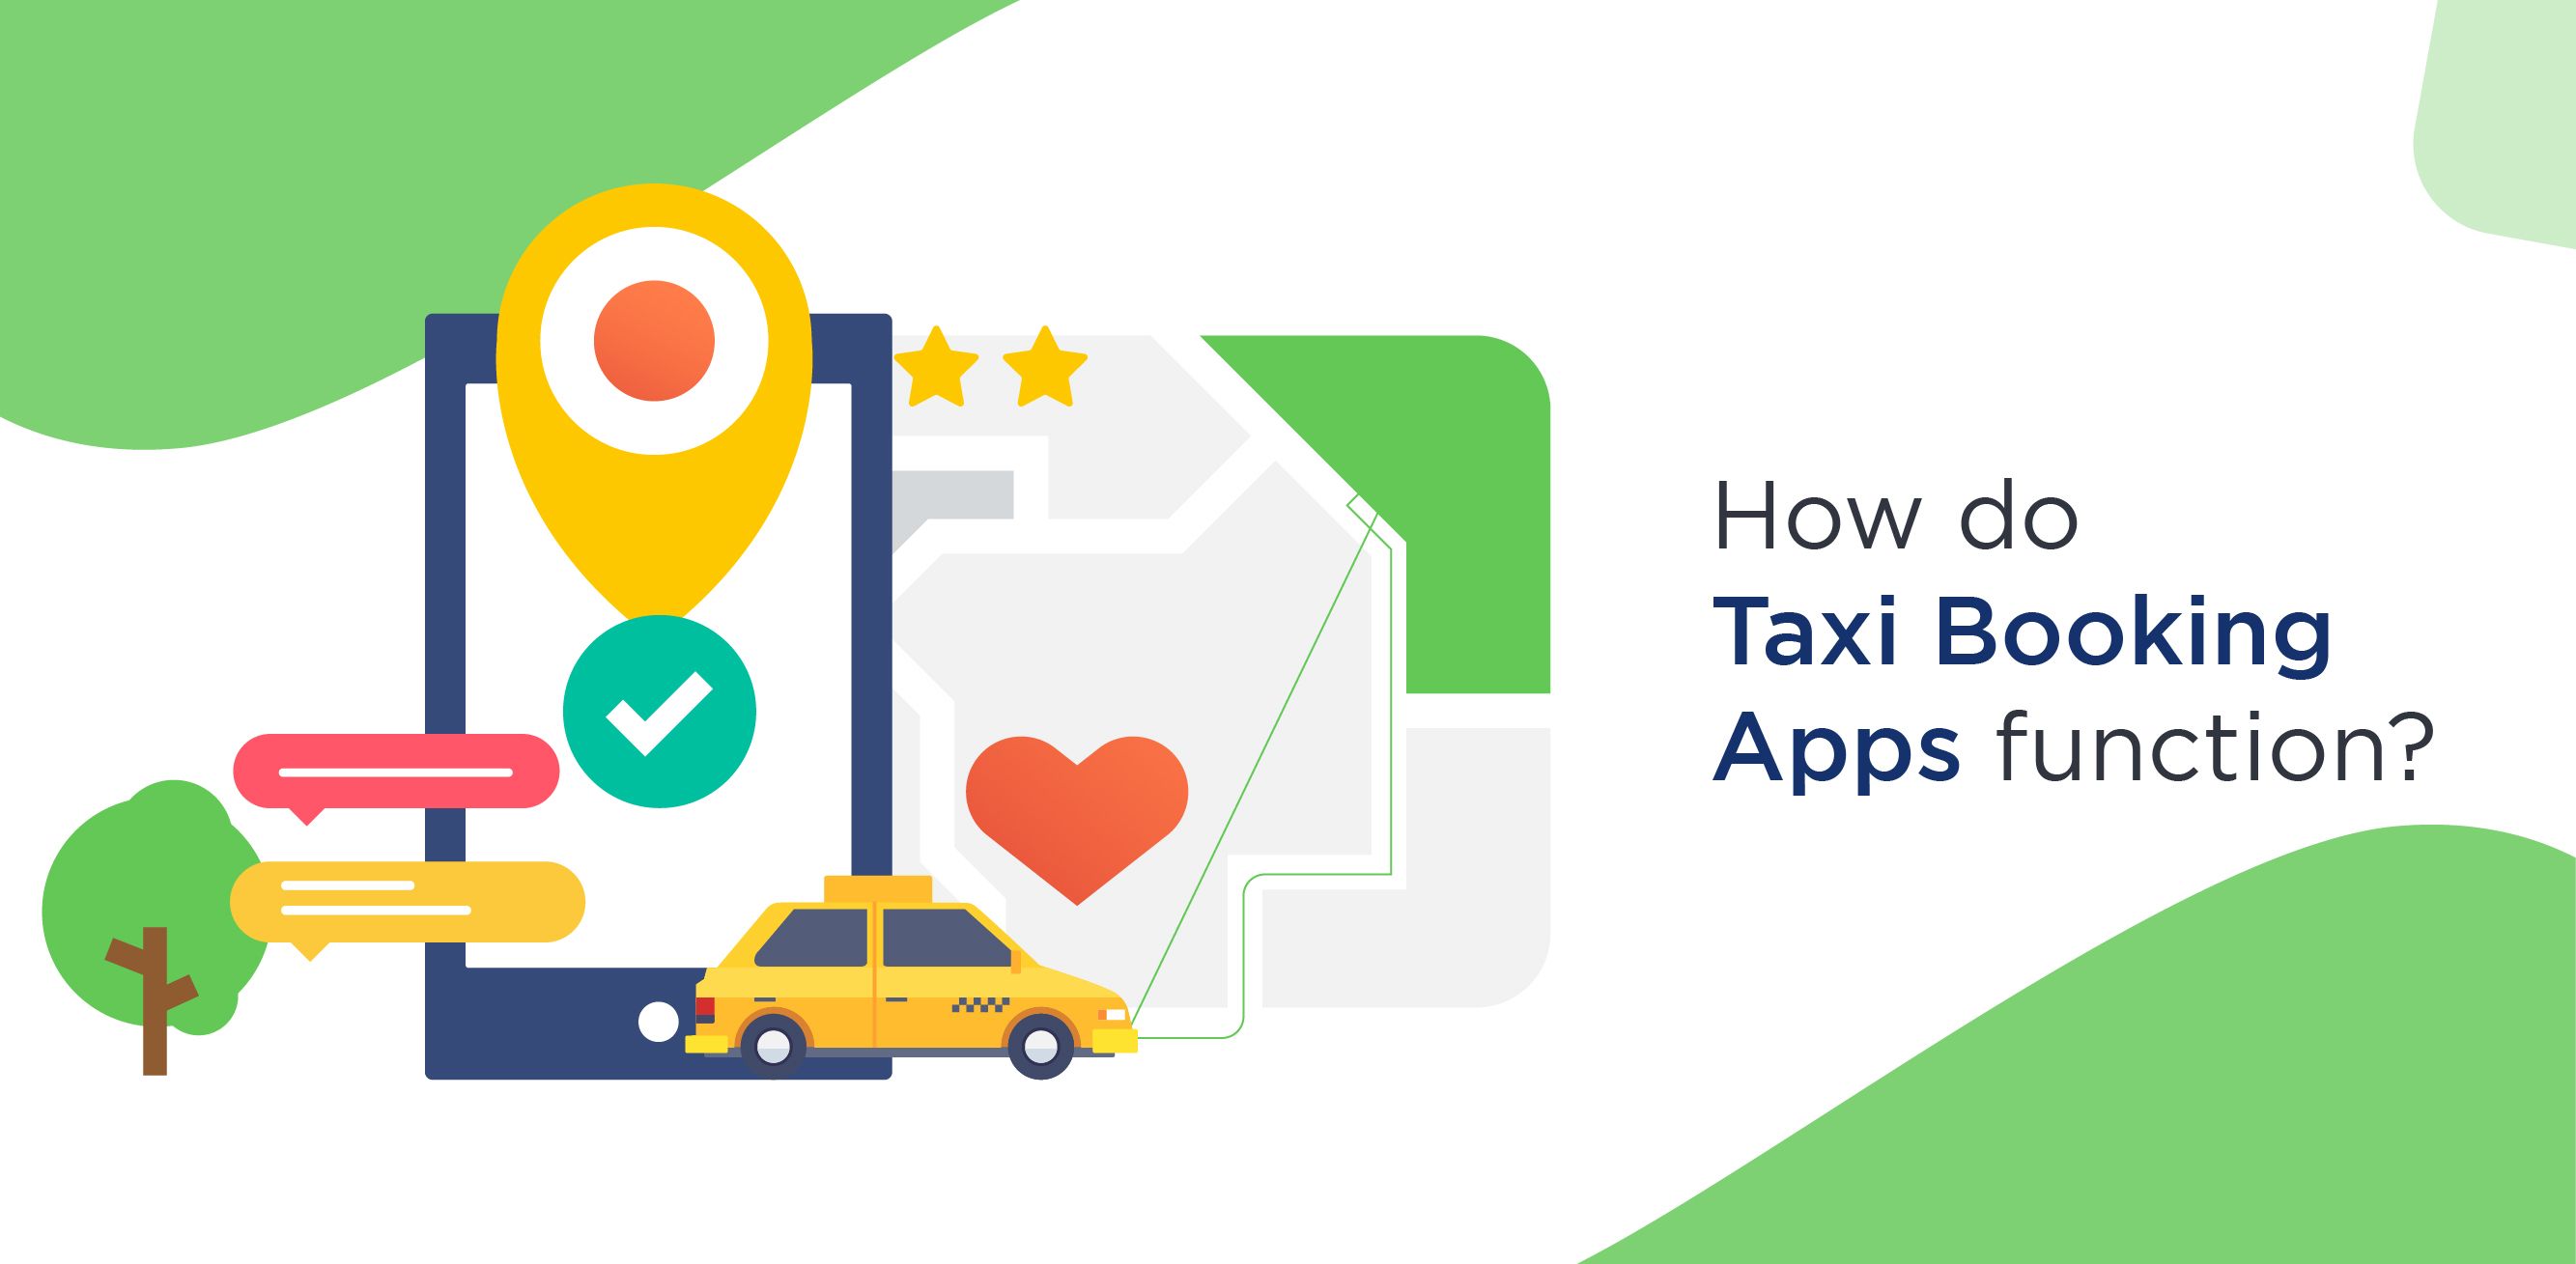 How do taxi booking apps function?